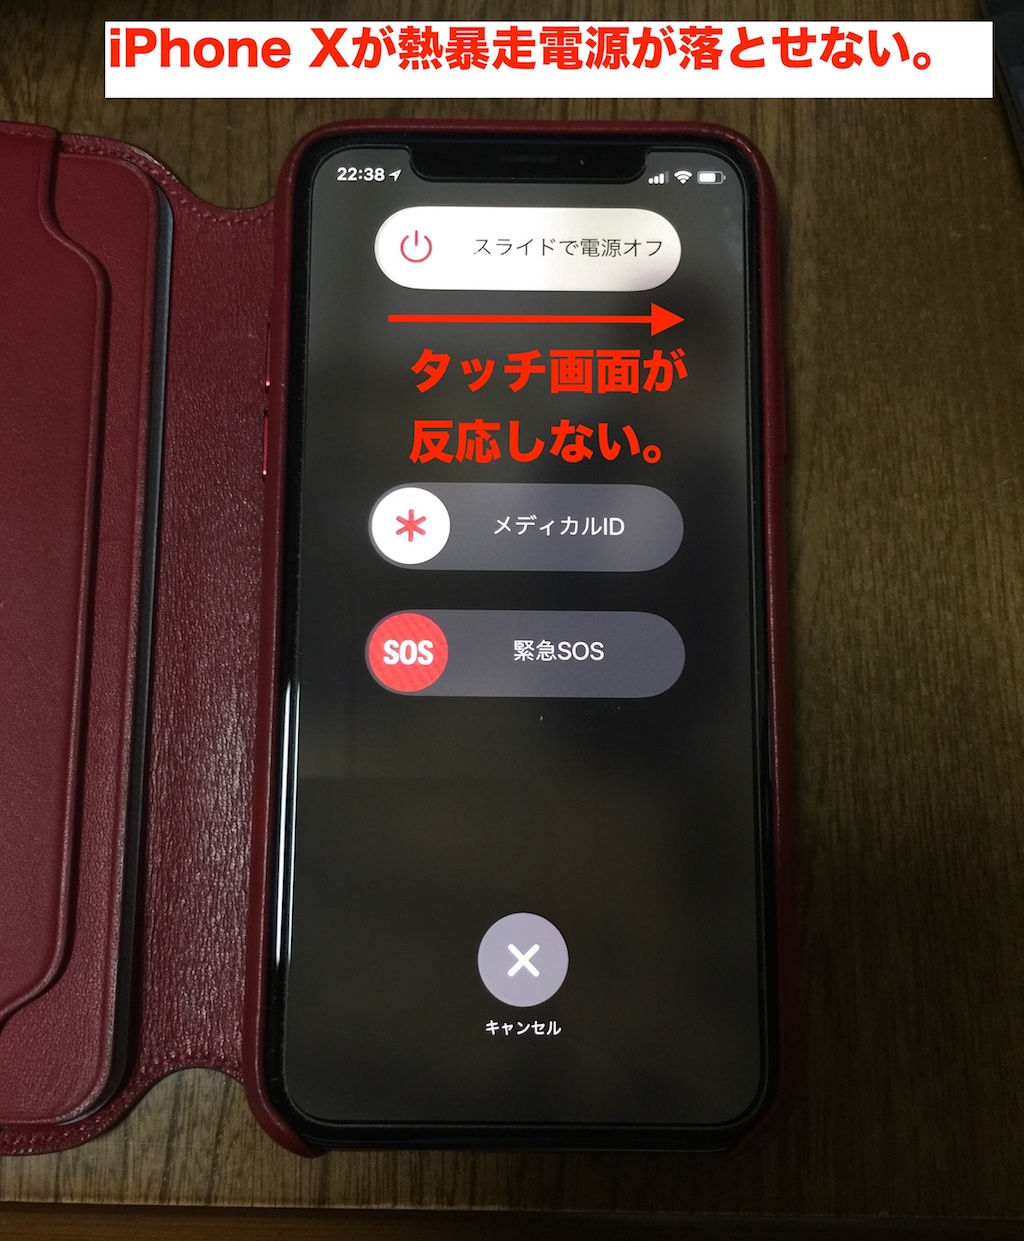 Iphone X 強制リセット 電源off の方法 ２階からmac